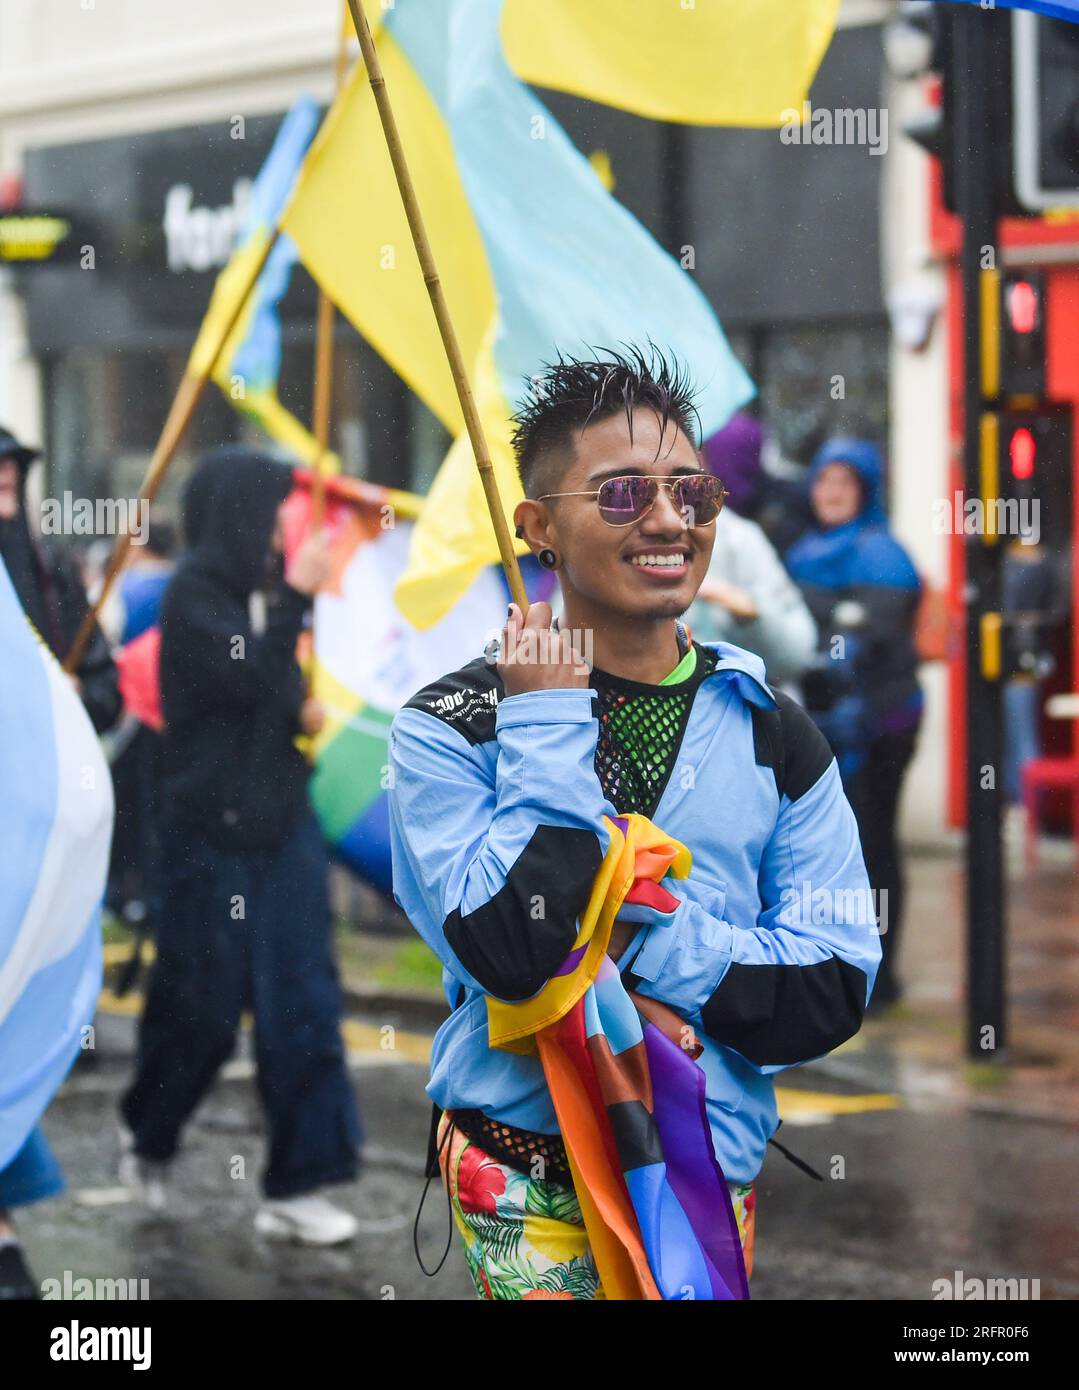 Brighton UK 5th August 2023 - Thousands take part in the Brighton & Hove Pride Parade despite the dreadful weather  caused by Storm Antoni which is battering arts of Britain today with strong winds and rain  : Credit Simon Dack / Alamy Live News Stock Photo